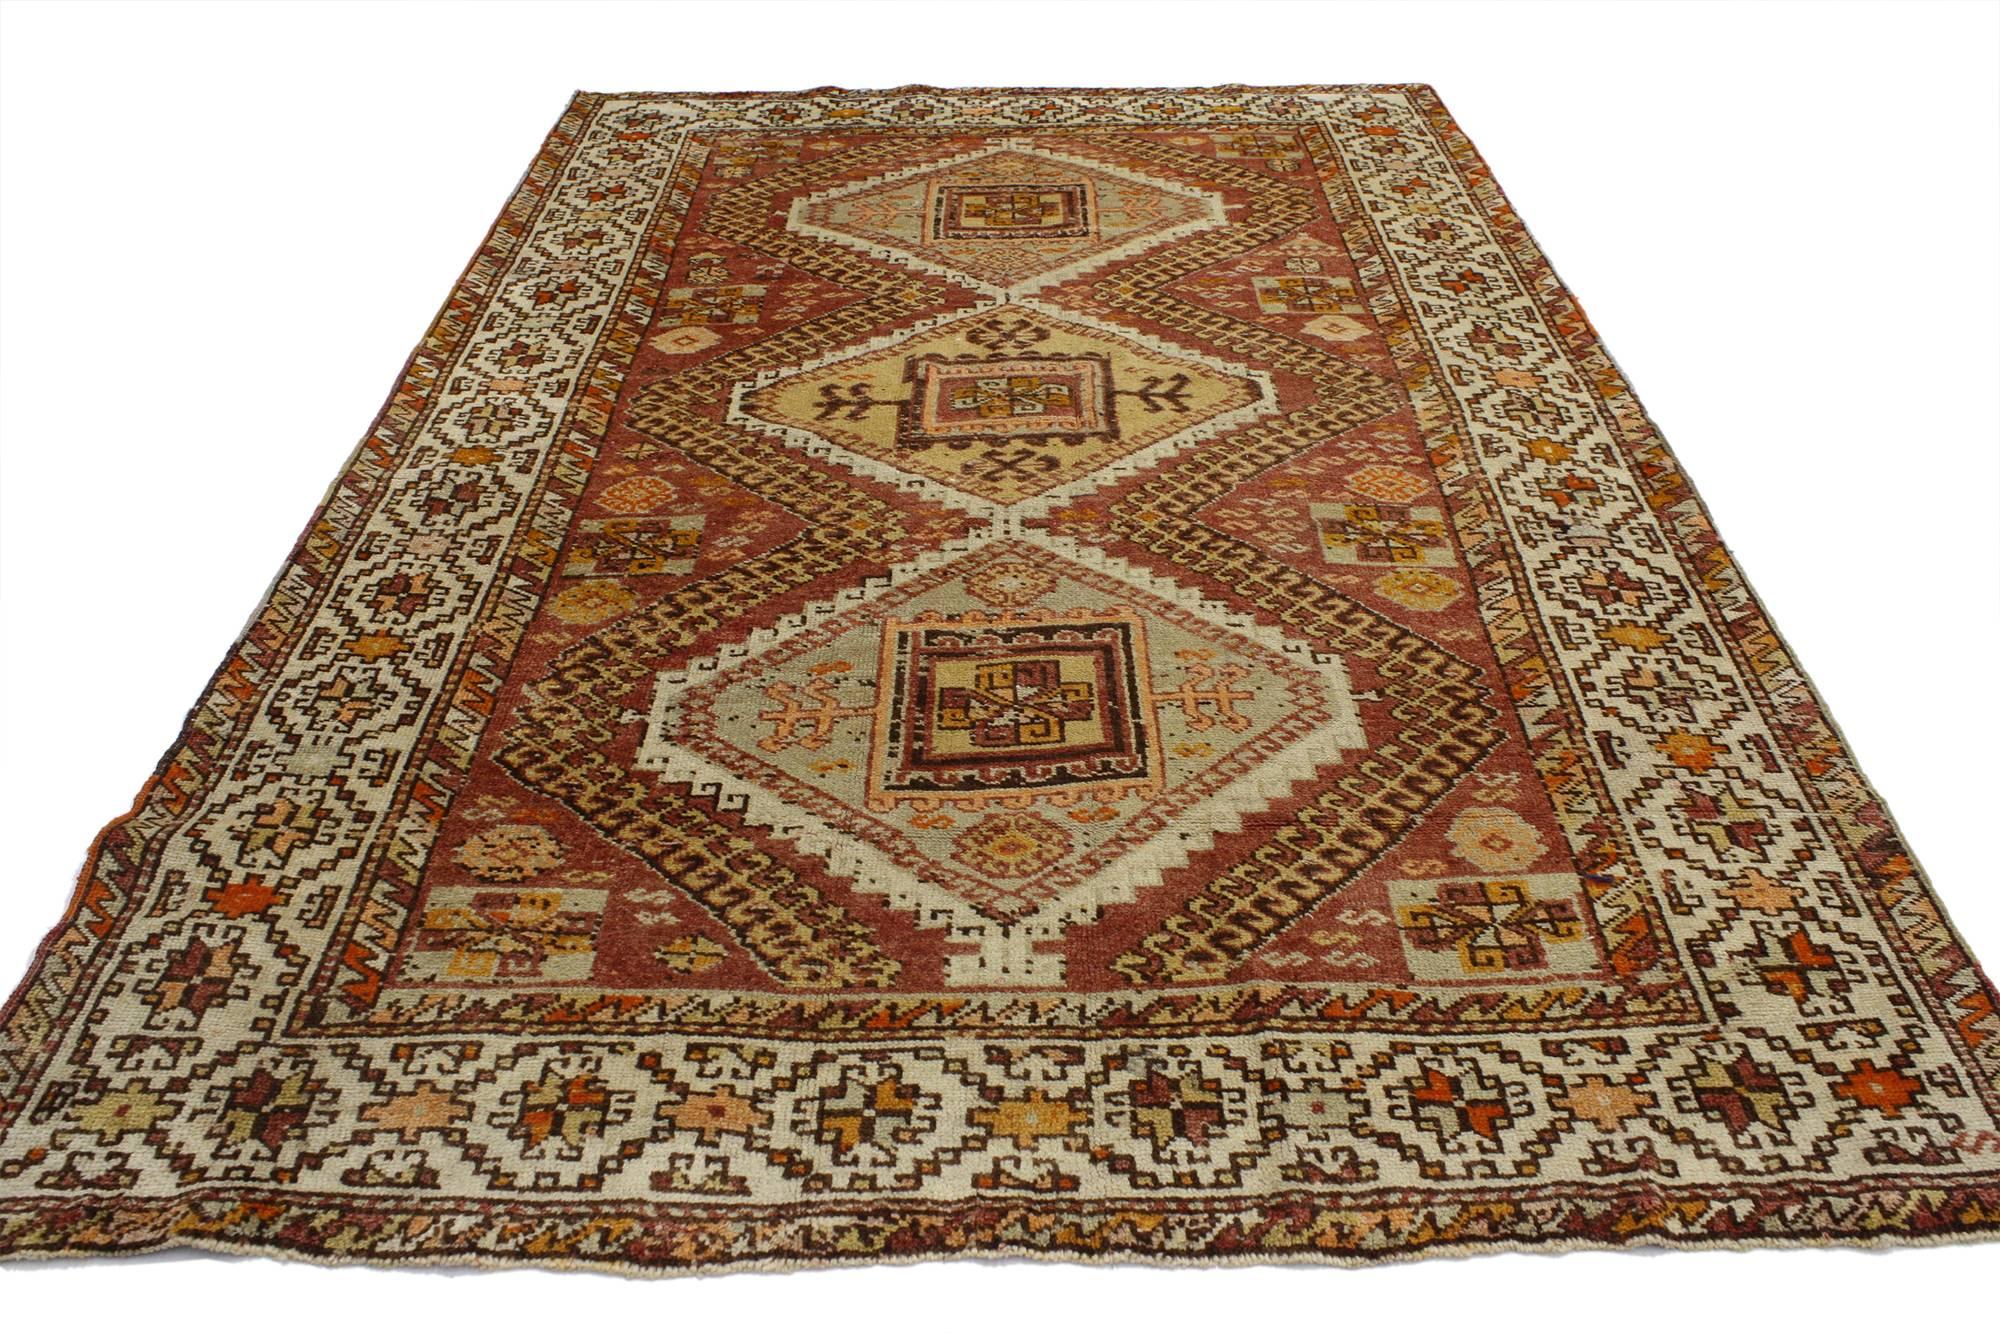 52107, vintage Turkish Oushak Accent rug, entry or foyer rug with craftsman style. This hand knotted wool vintage Turkish Oushak rug features three interconnected hooked diamond medallions with ram’s Horn pendants spread across an abrashed brick red